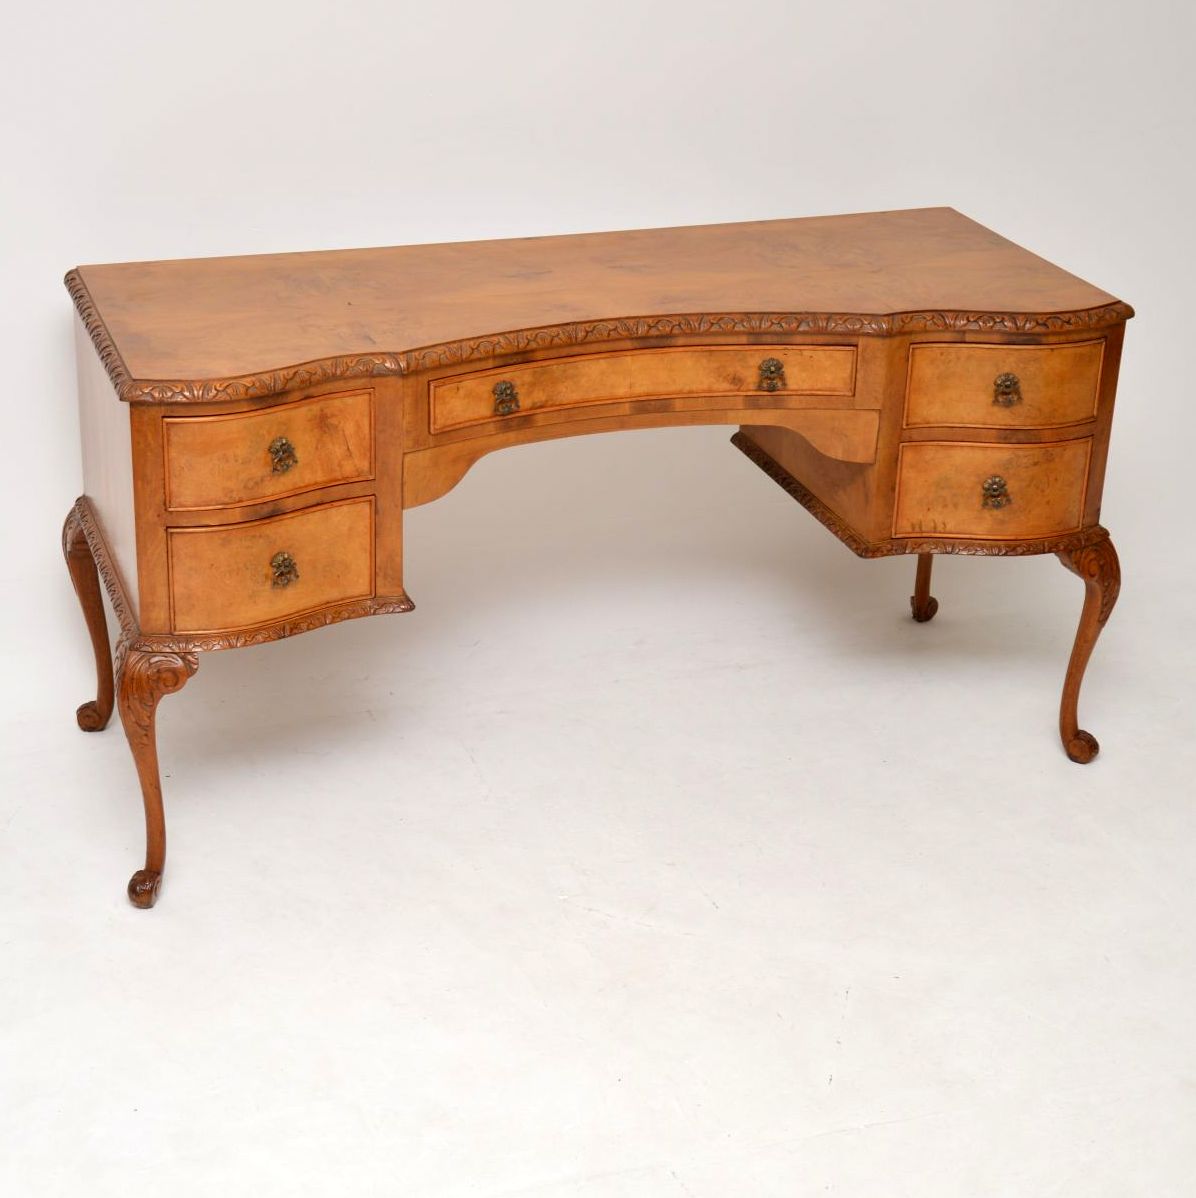 Antique Queen Anne Style Burr Walnut Desk or Dressing Table